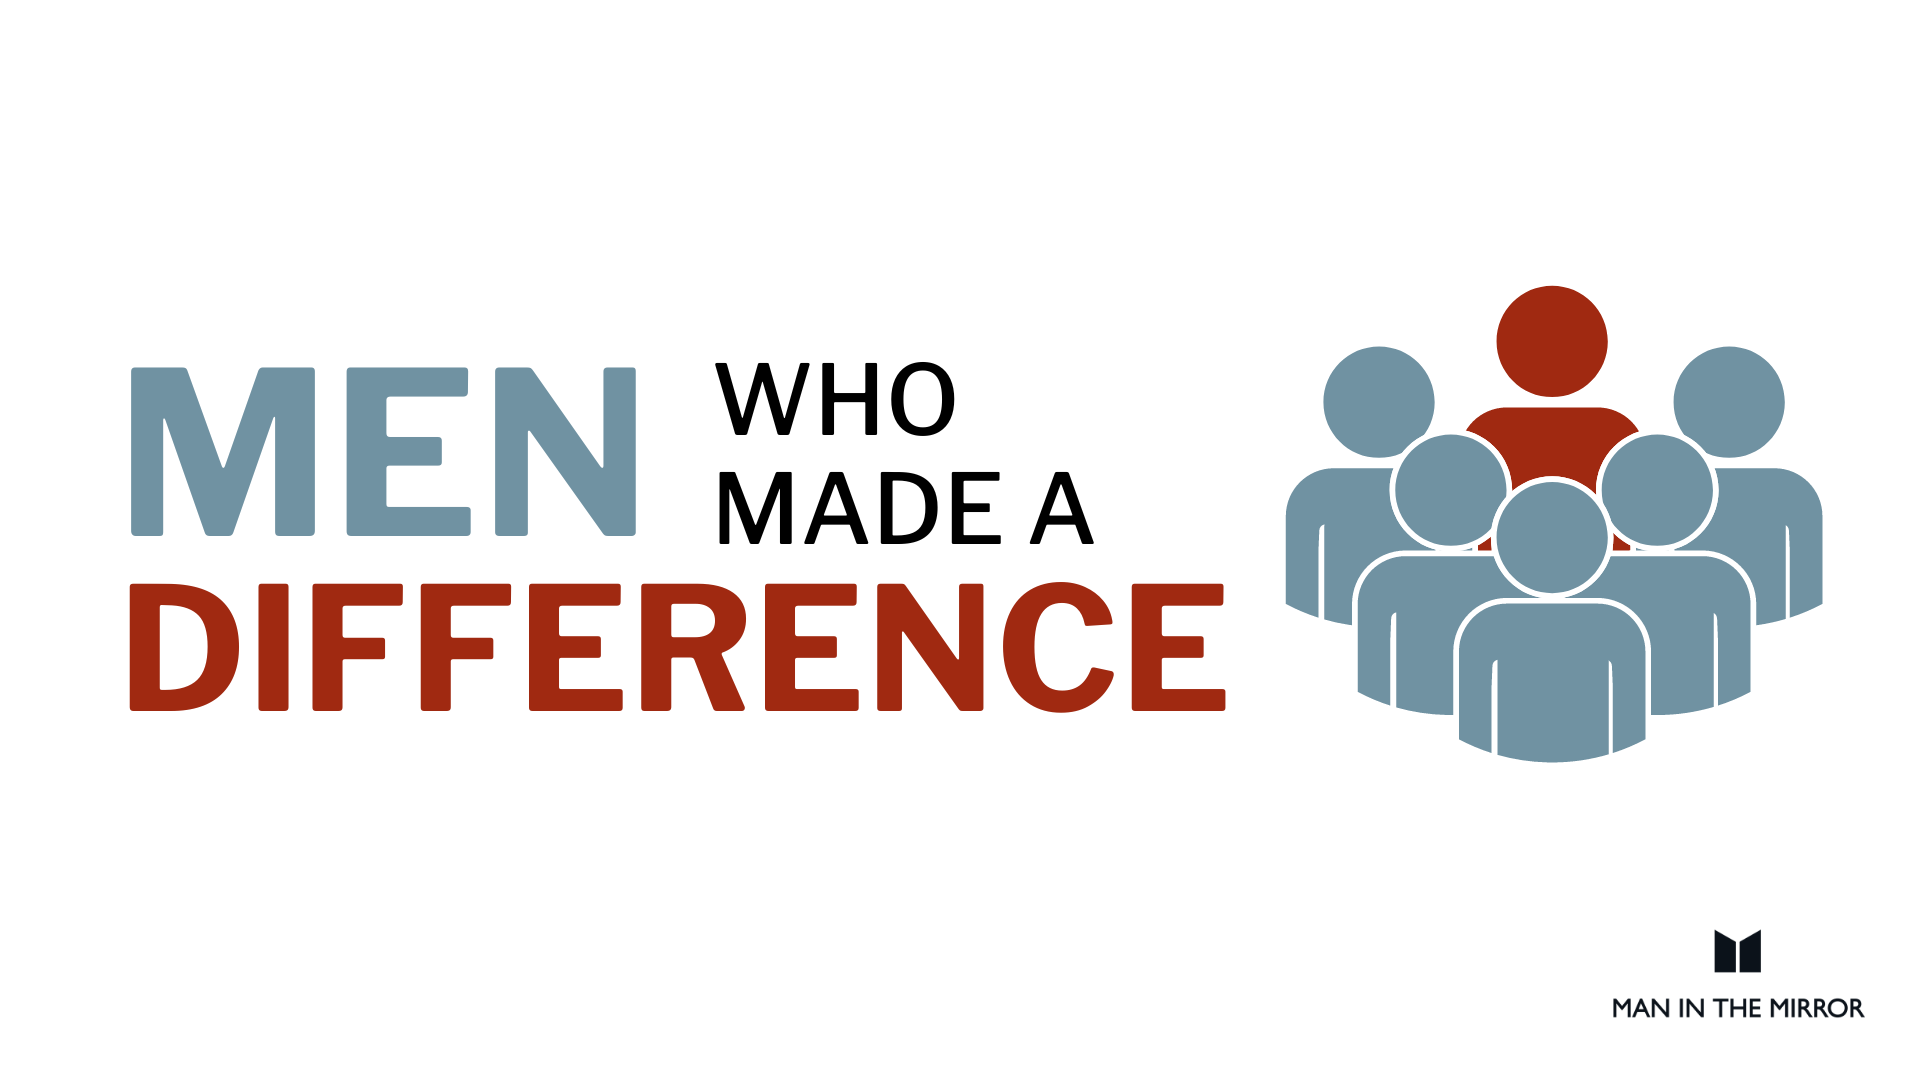 Men Who Made a Difference